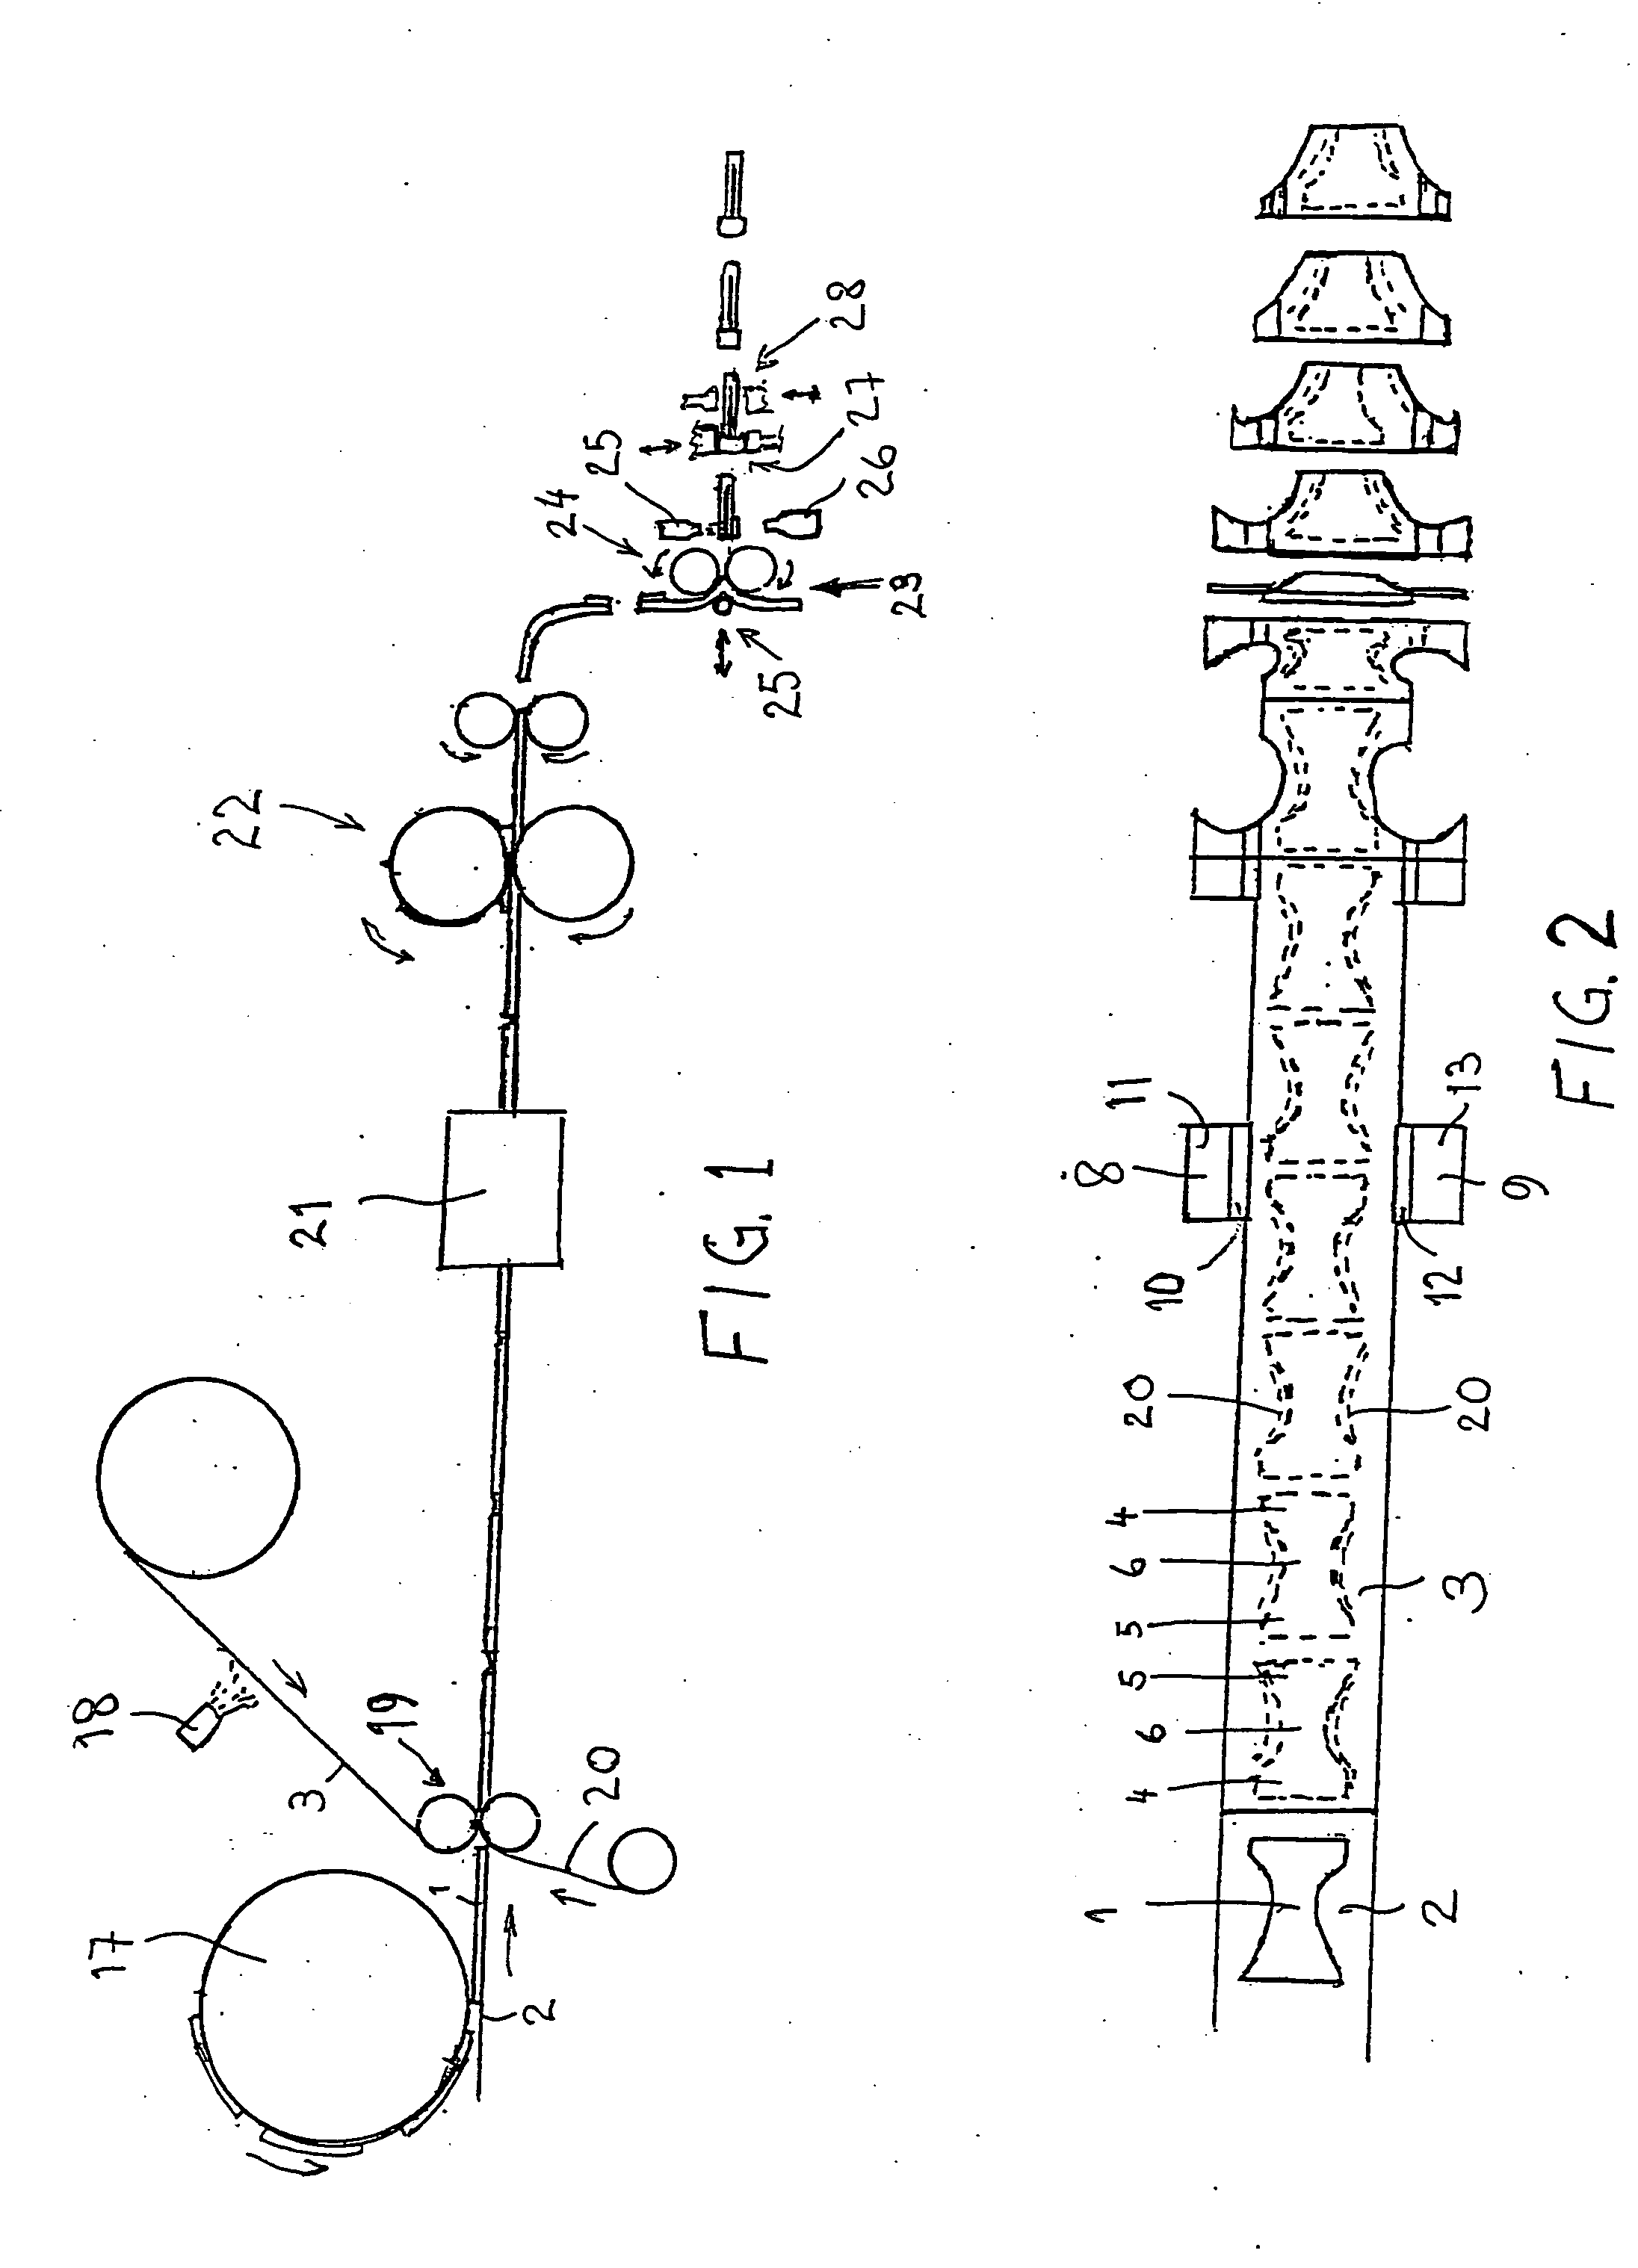 Method for production of diaper pants having a detachable and resealable connection member